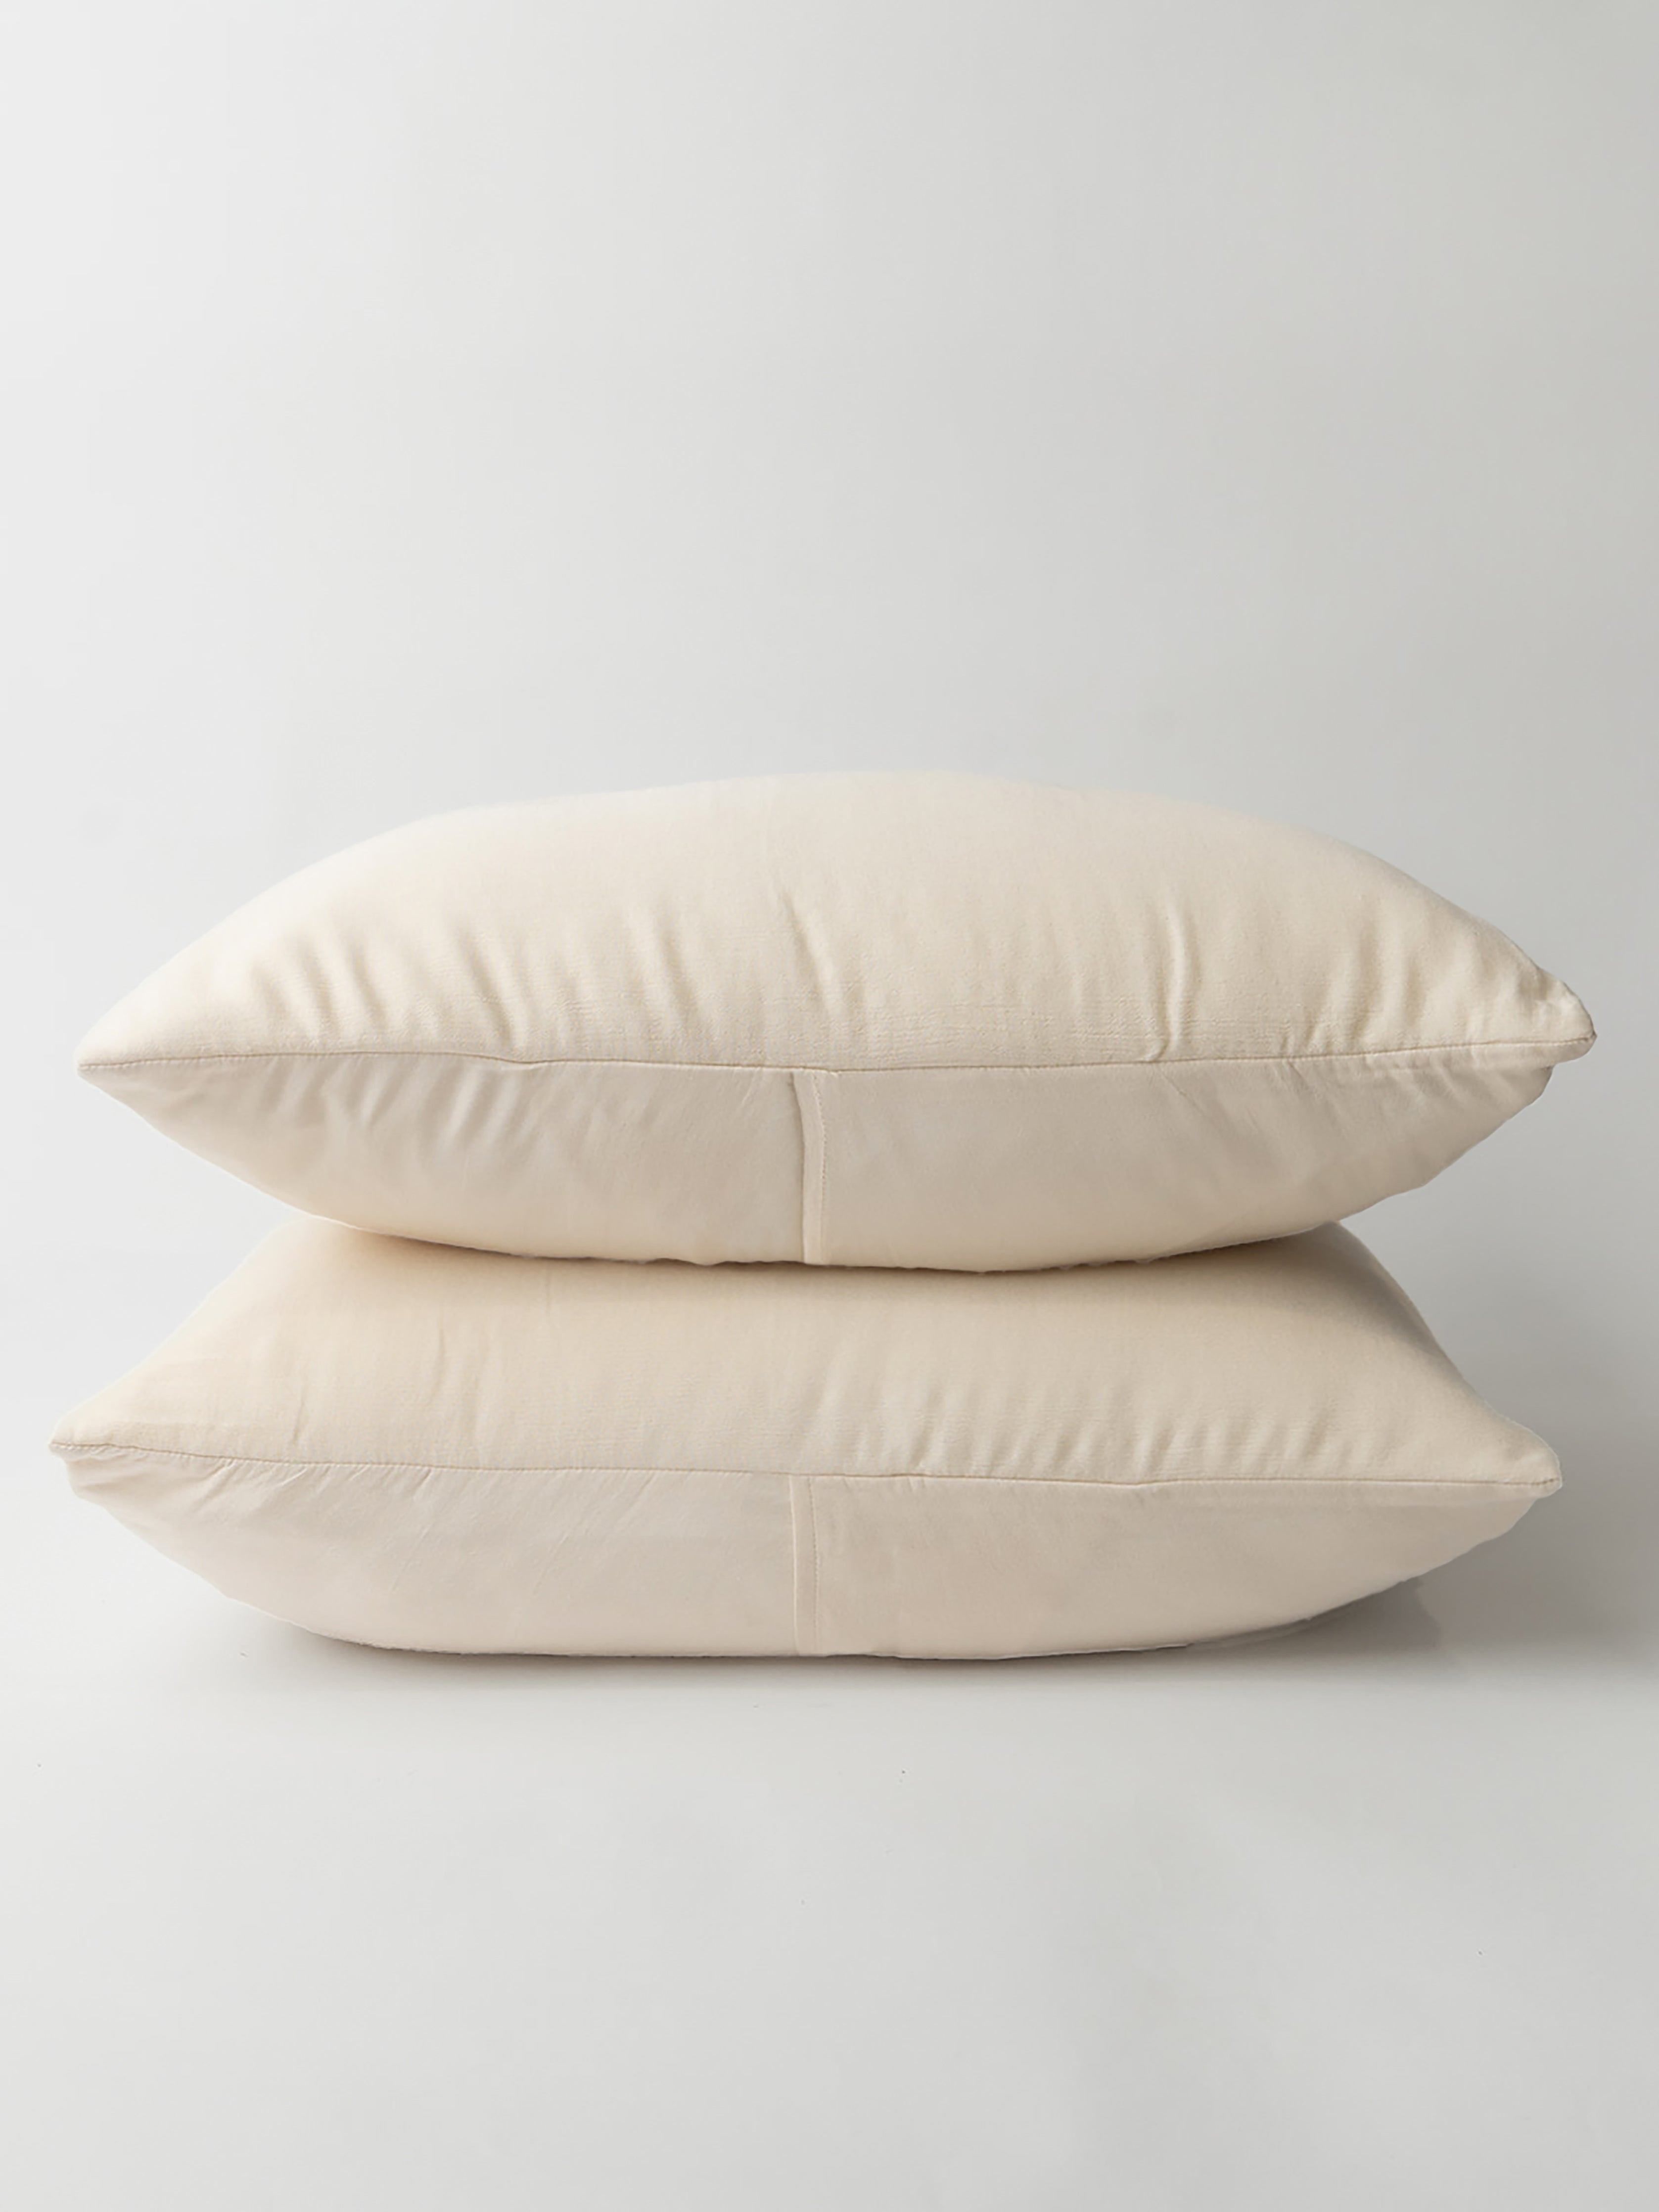 Buttermilk Aire Bamboo Shams. The shams are photographed with a white background|Color:Buttermilk|Style:Standard